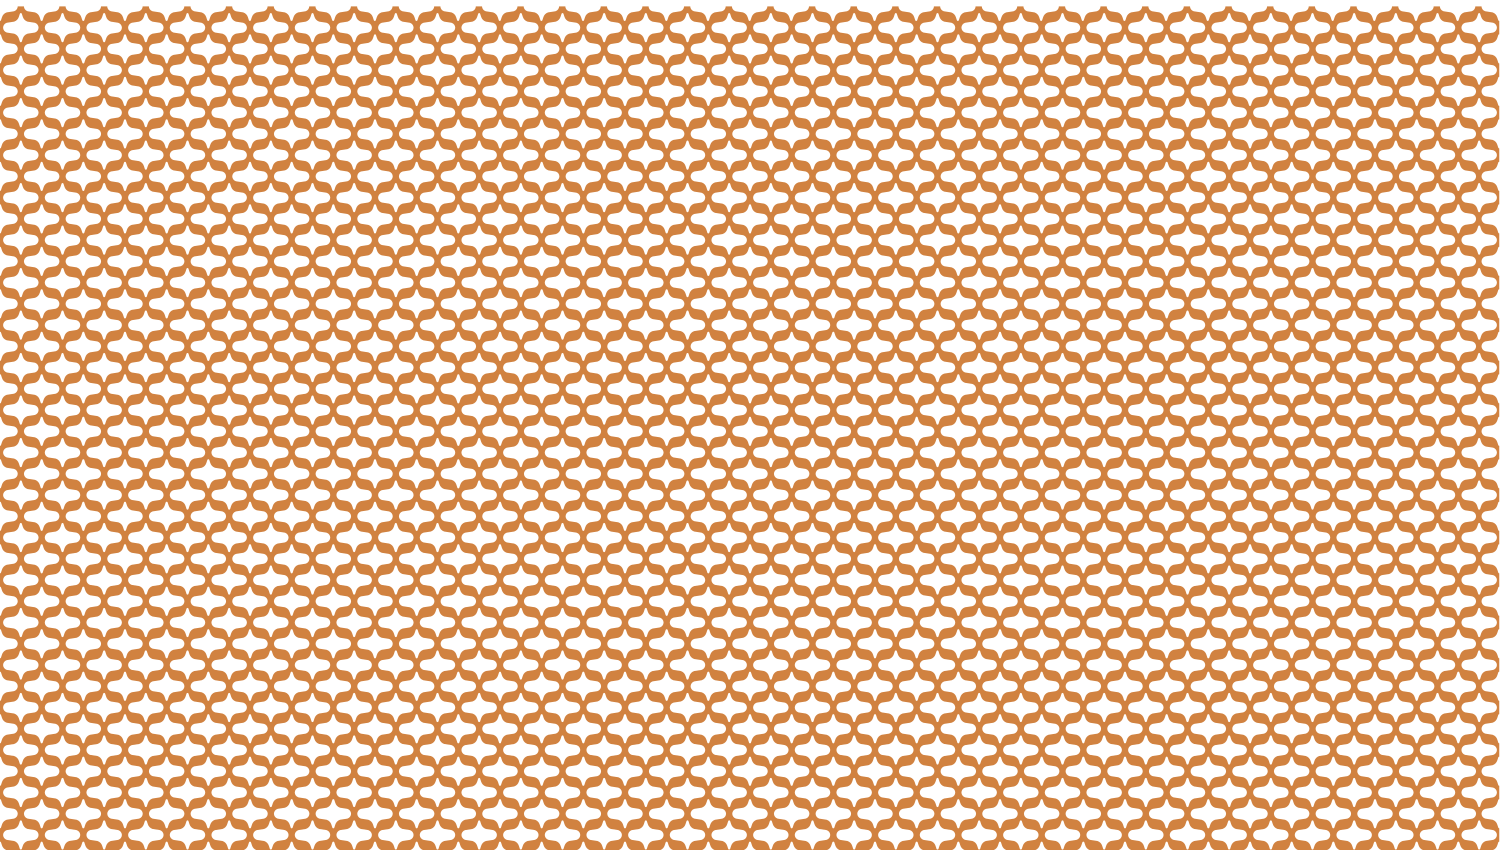 Parasoleil™ Seville© pattern displayed with a ochre color overlay